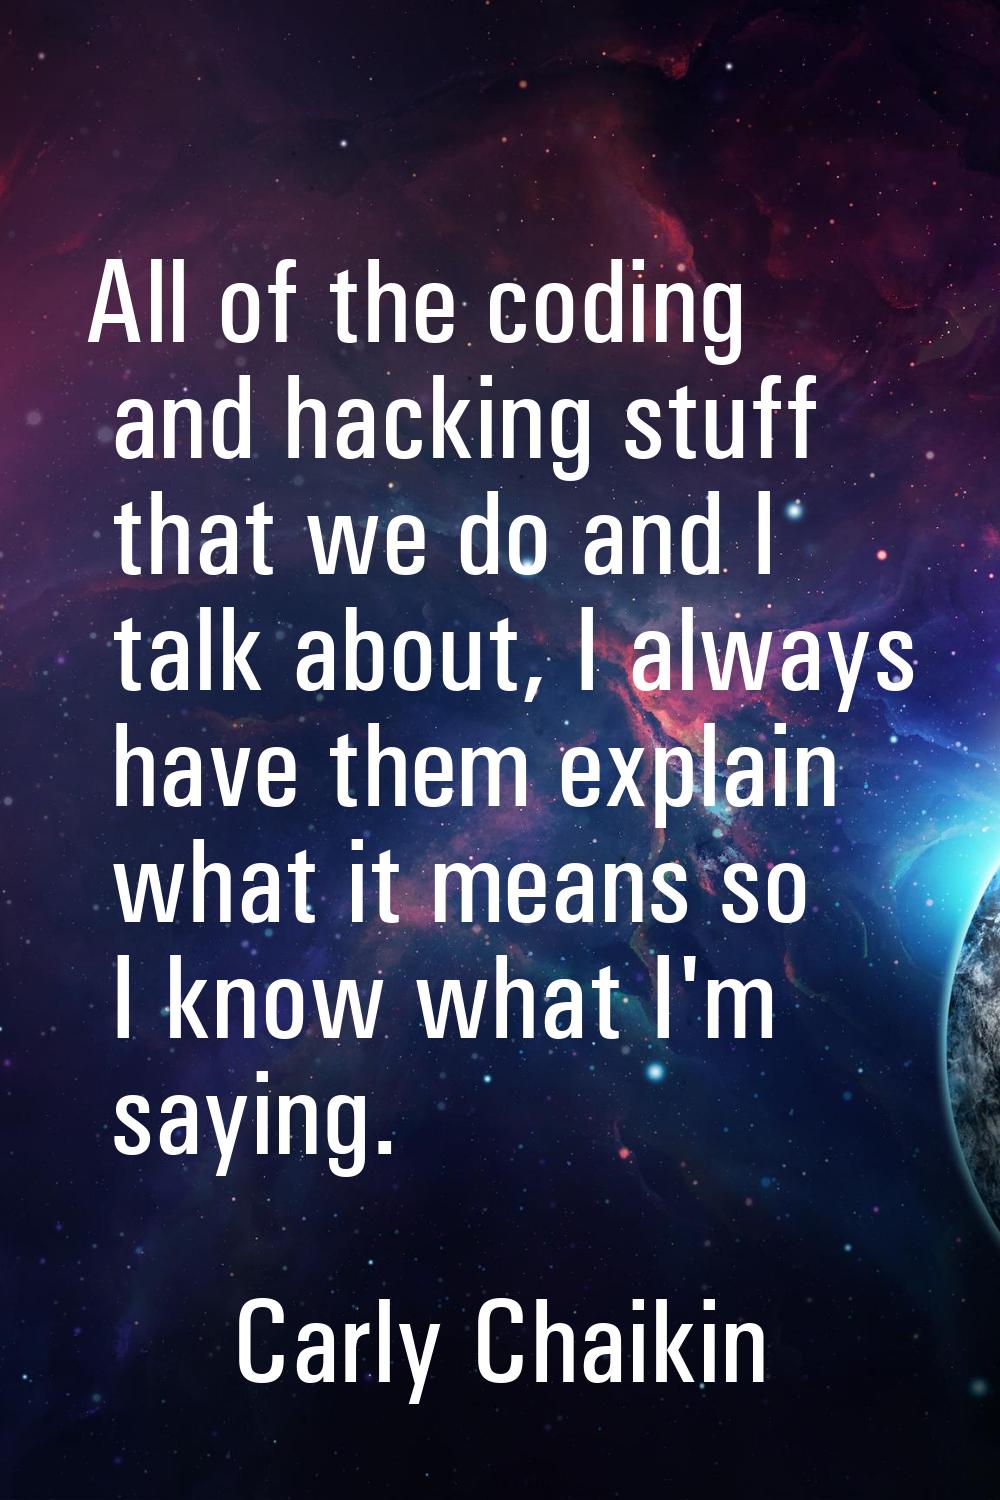 All of the coding and hacking stuff that we do and I talk about, I always have them explain what it